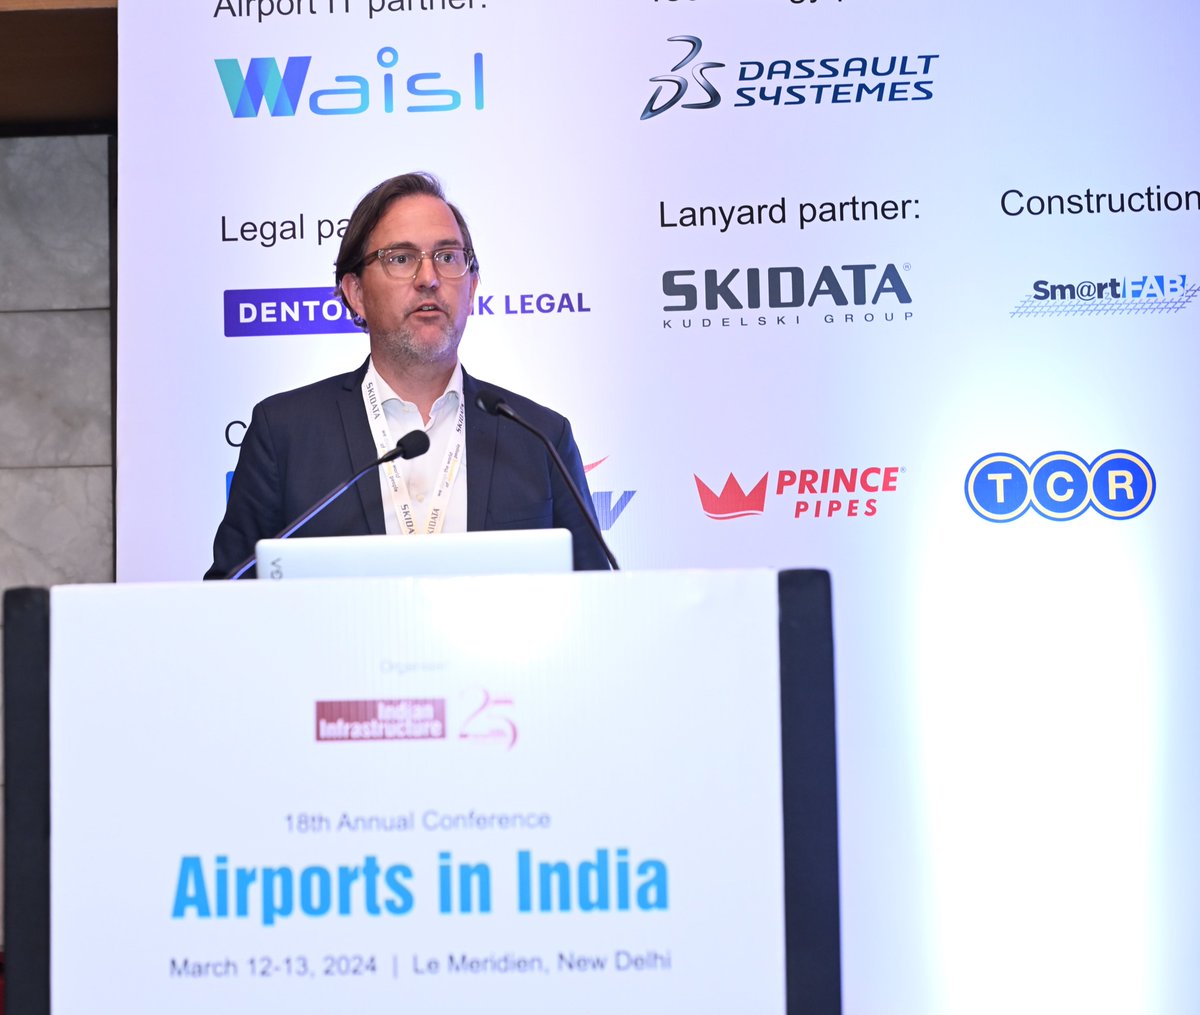 Nicolas Schenk, Chief Development Officer,@NIAirport at our 18th annual conference on Airports in India.

We thank him for bringing into focus the 'Noida International Airport Perspective'.

#airports #airportsindia #aeroinfrastructure #airportsector